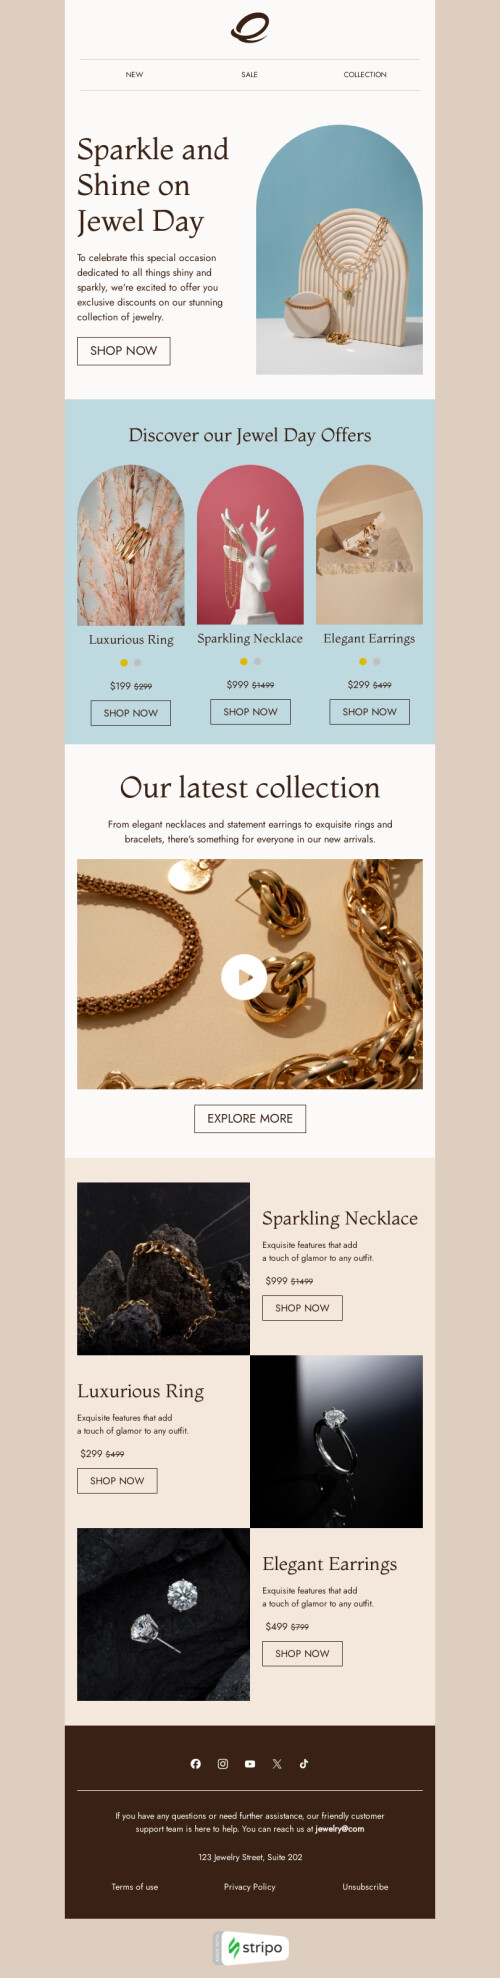 Jewel Day email template "Sparkle and shine" for jewelry industry mobile view